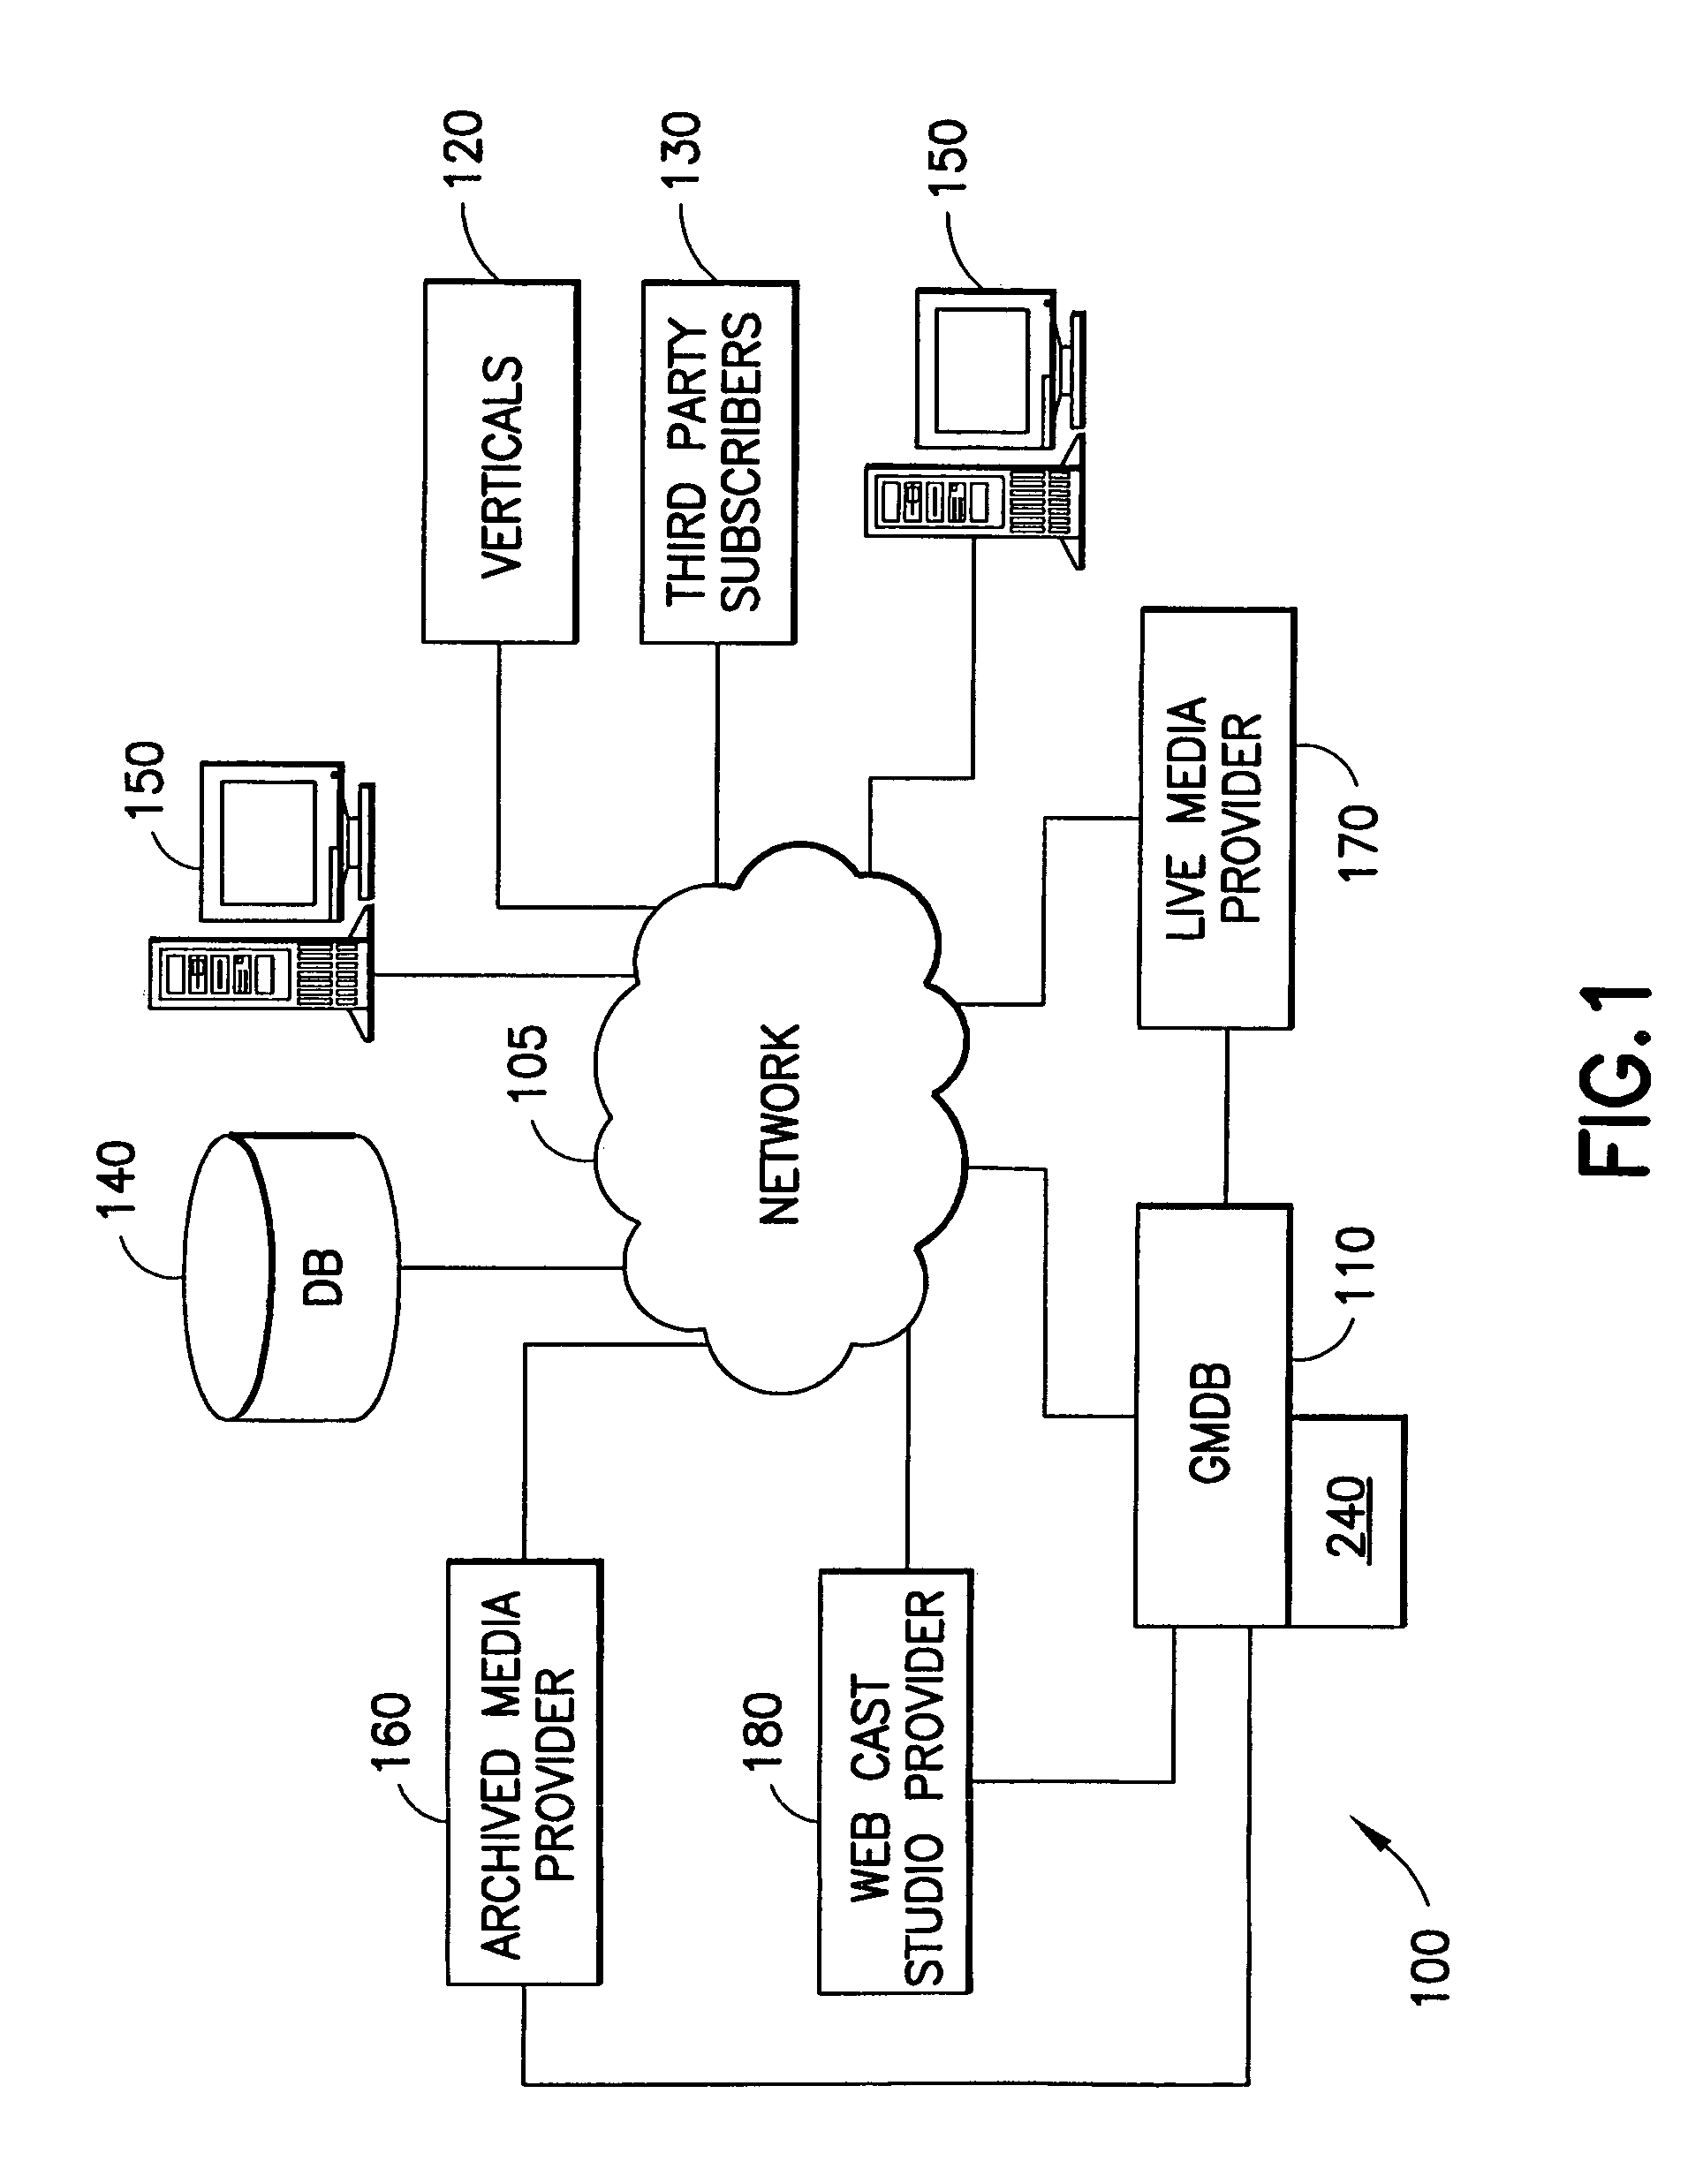 Method and system for managing digital content including streaming media